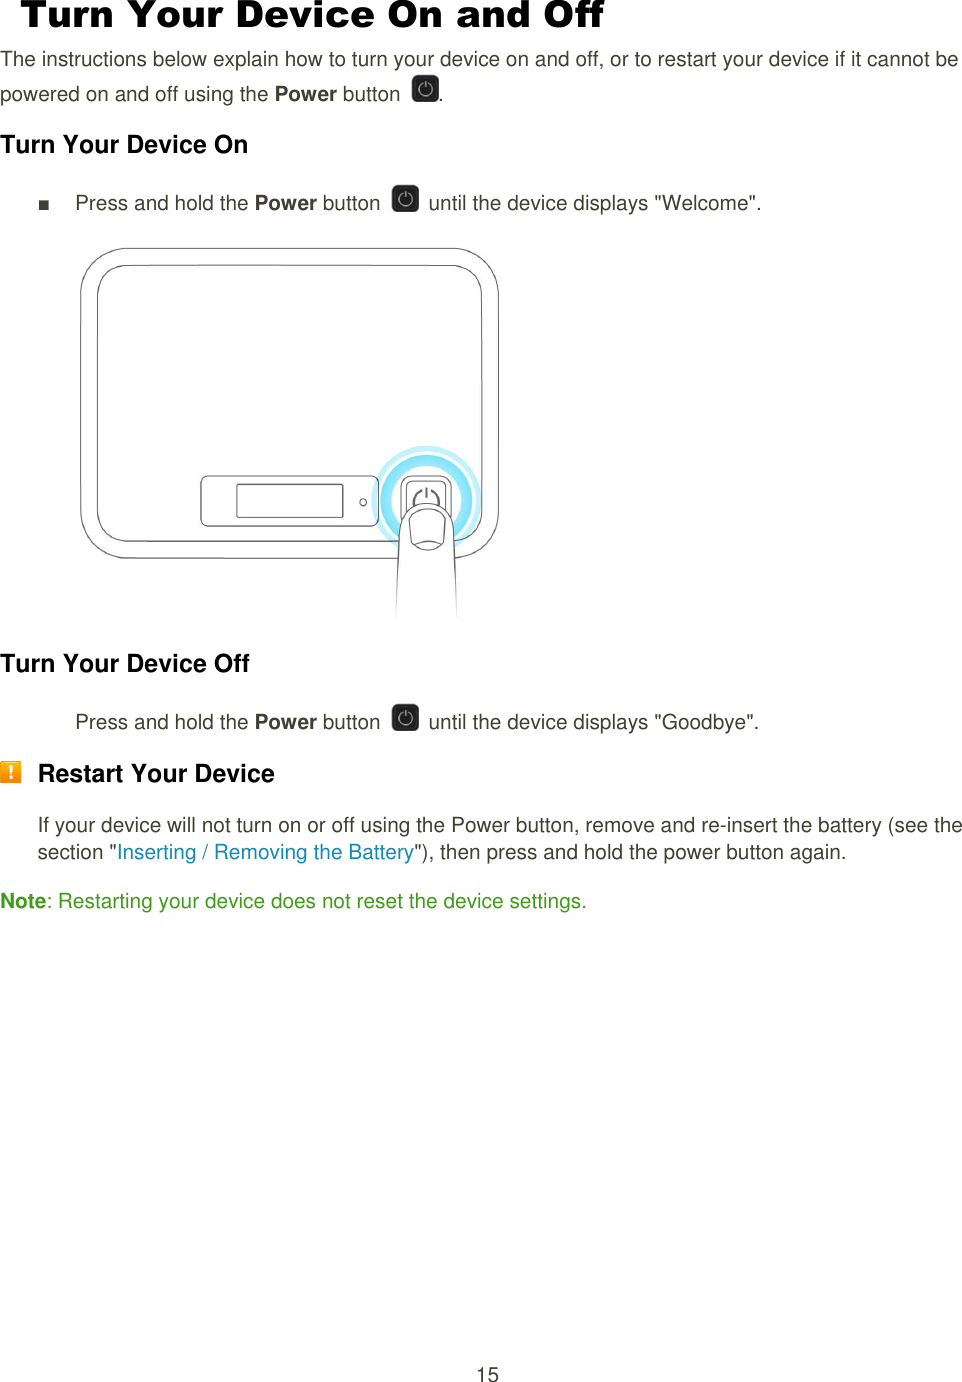 15  Turn Your Device On and Off The instructions below explain how to turn your device on and off, or to restart your device if it cannot be powered on and off using the Power button  . Turn Your Device On ■  Press and hold the Power button    until the device displays &quot;Welcome&quot;.   Turn Your Device Off Press and hold the Power button    until the device displays &quot;Goodbye&quot;.    Restart Your Device If your device will not turn on or off using the Power button, remove and re-insert the battery (see the section &quot;Inserting / Removing the Battery&quot;), then press and hold the power button again. Note: Restarting your device does not reset the device settings. 